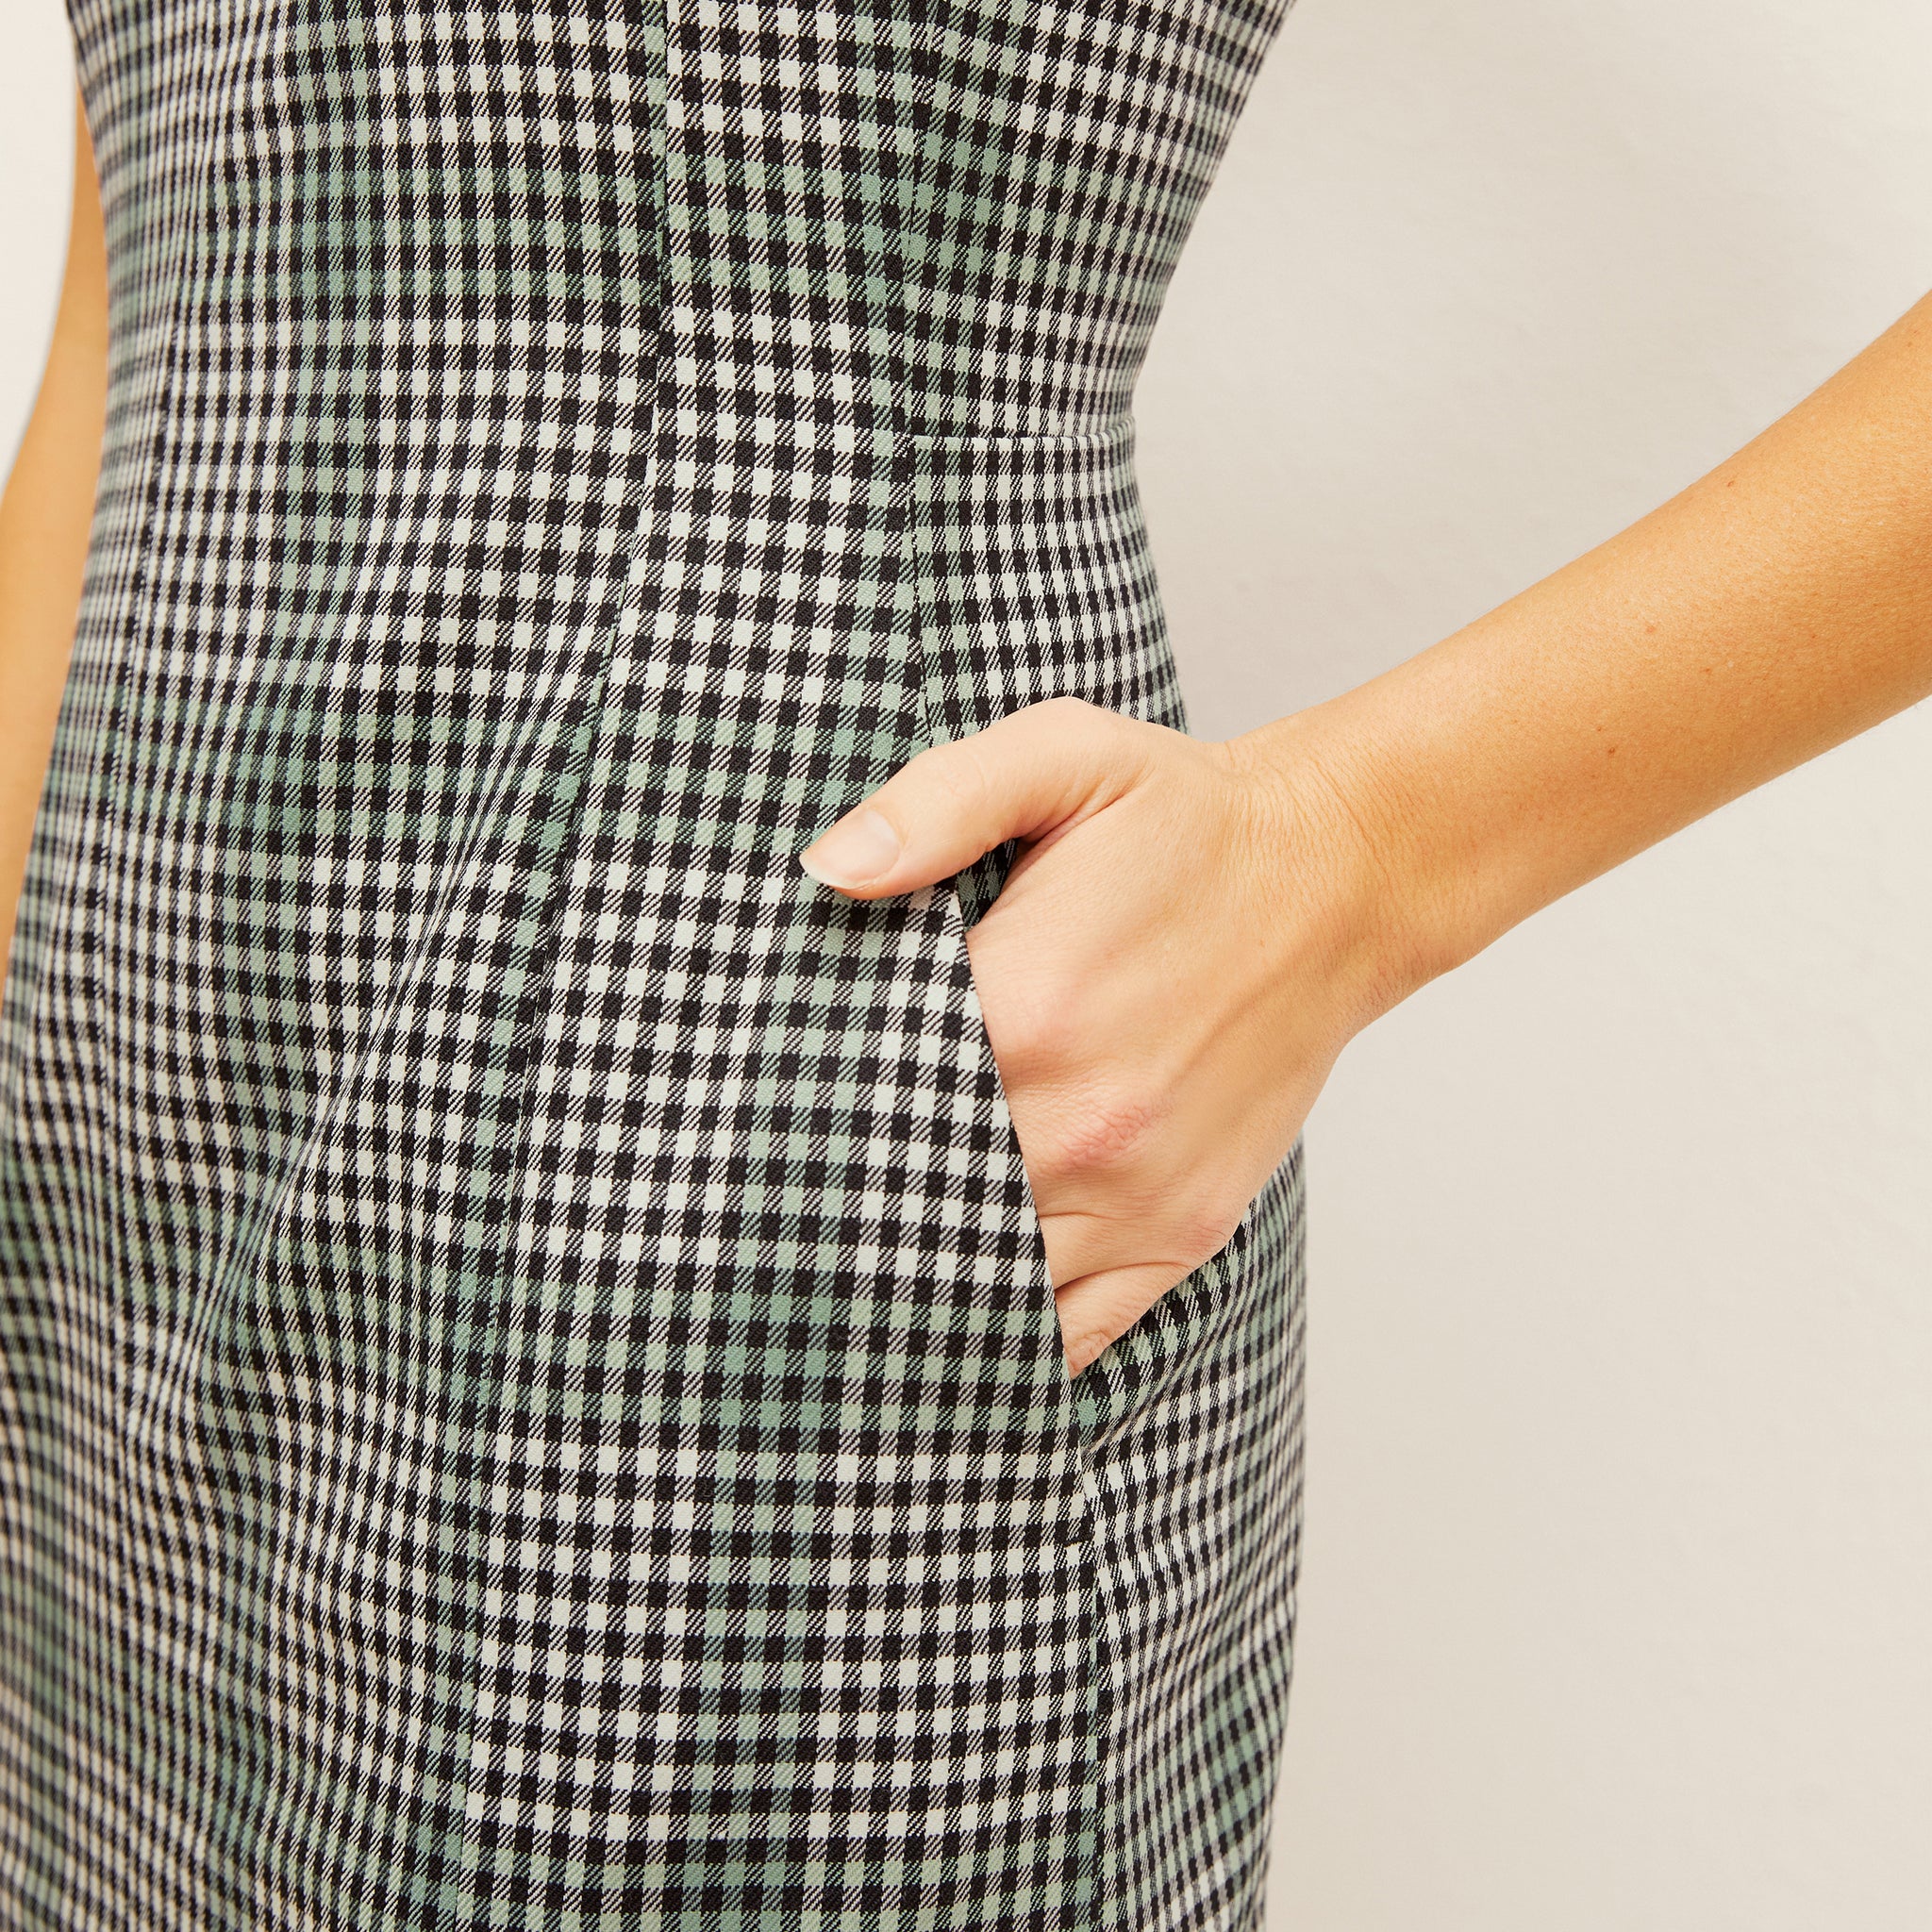 detail image of the pocket of the constance dress in check plaid